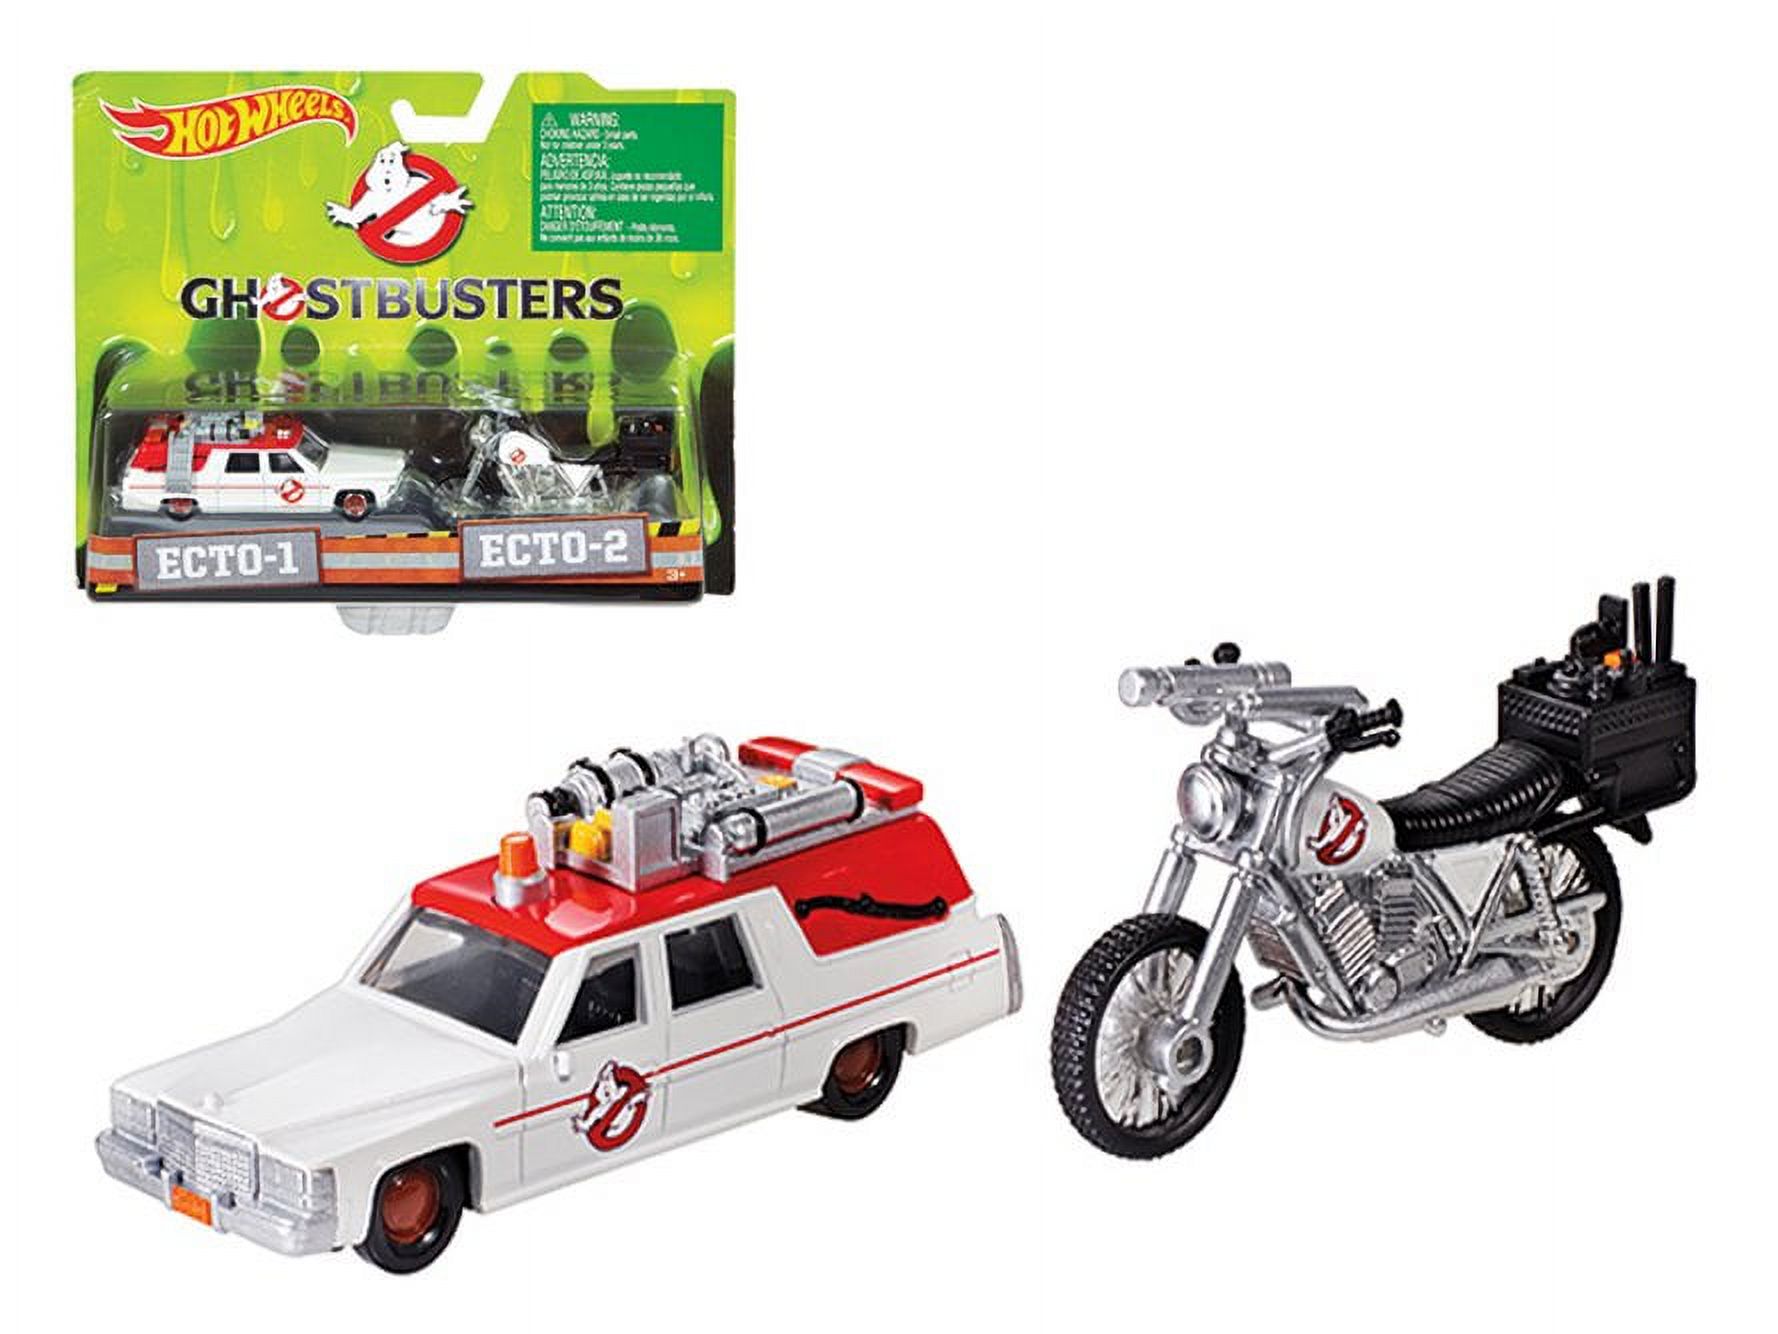 ECTO-1 Ambulance Car and ECTO-2 Bike, Ghostbusters - Hot Wheels DRW73 - 1/64 scale Diecast Model Toy Car - image 1 of 1